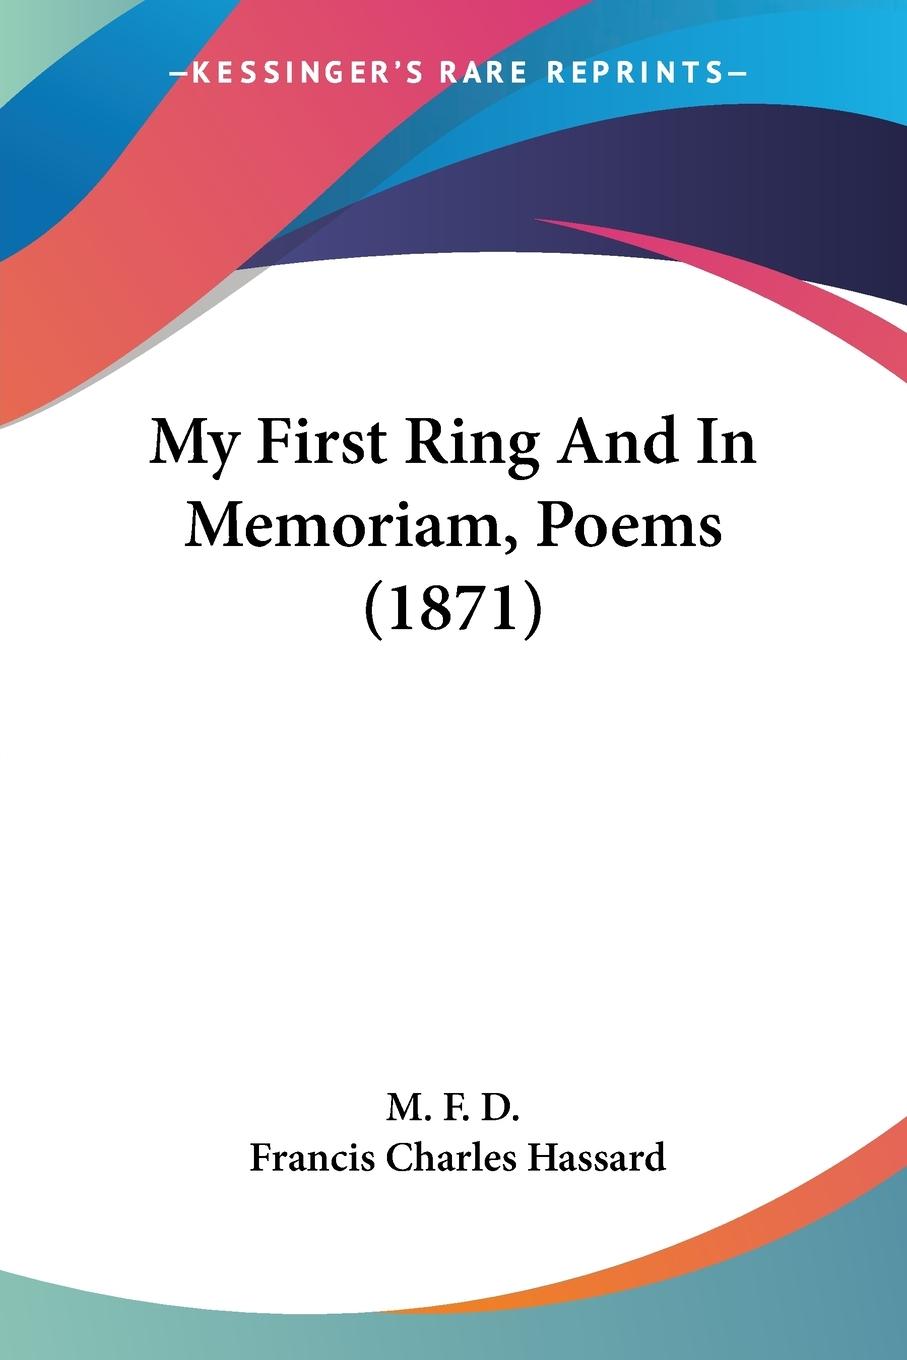 My First Ring And In Memoriam, Poems (1871) - M. F. D. Hassard, Francis Charles